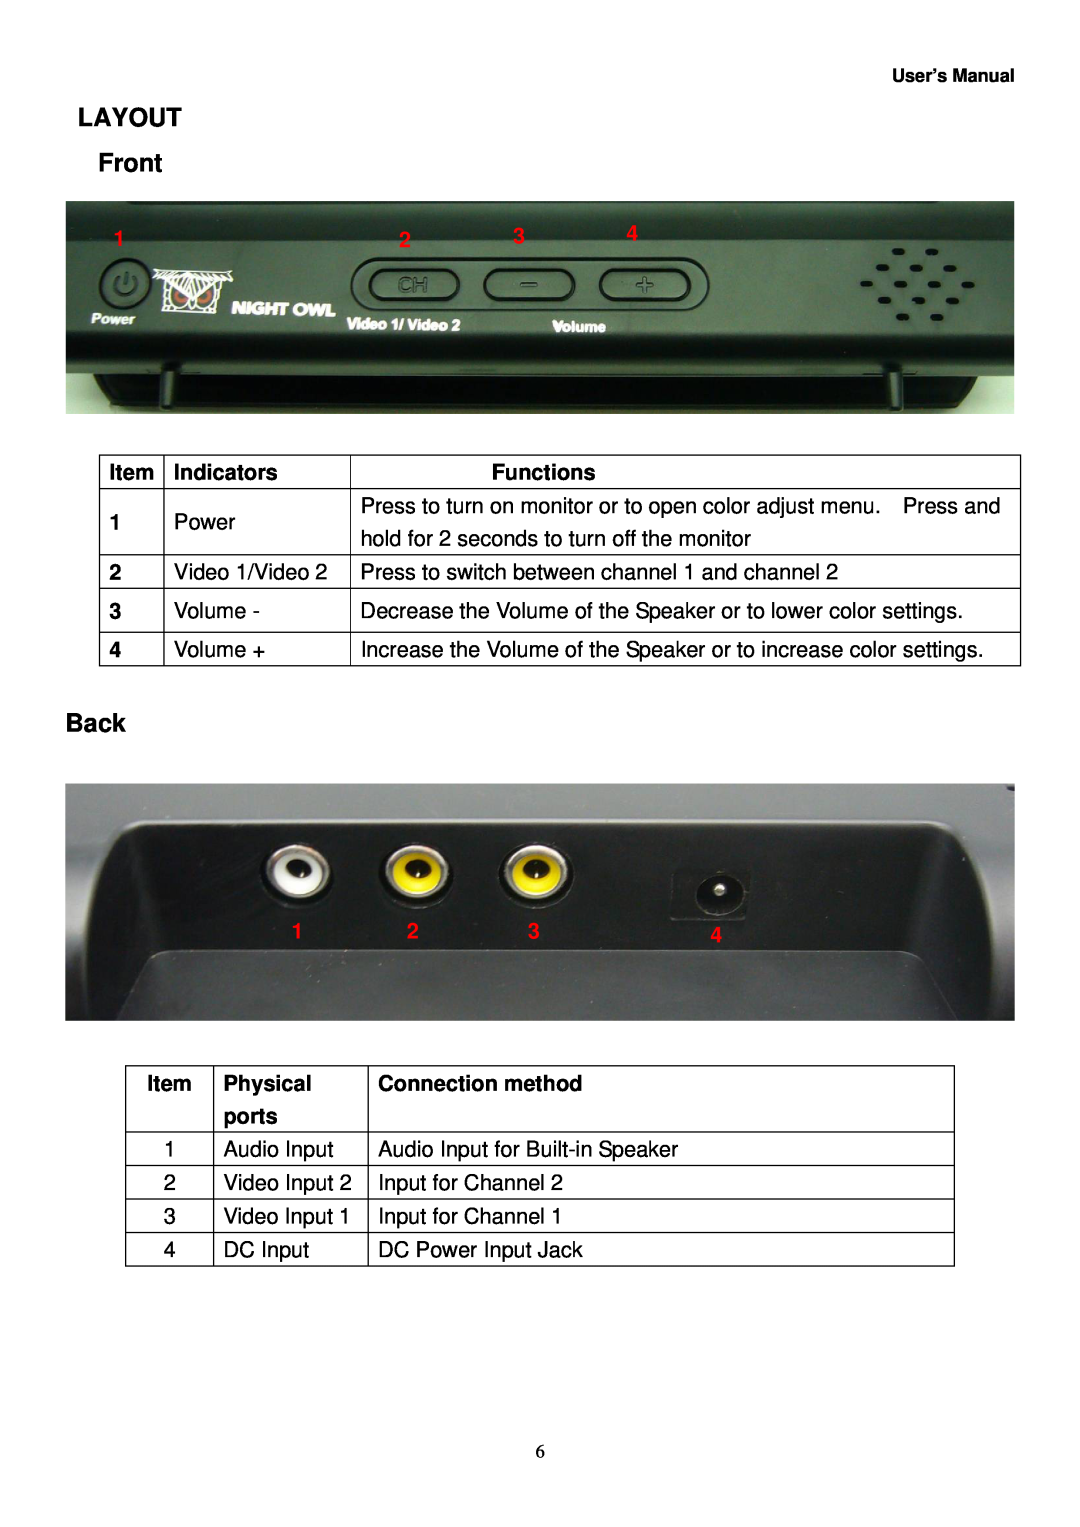 Night Owl Optics NO-8LCD manual LAYOUT Front, Back, Item Indicators, Functions, Physical, Connection method, ports 